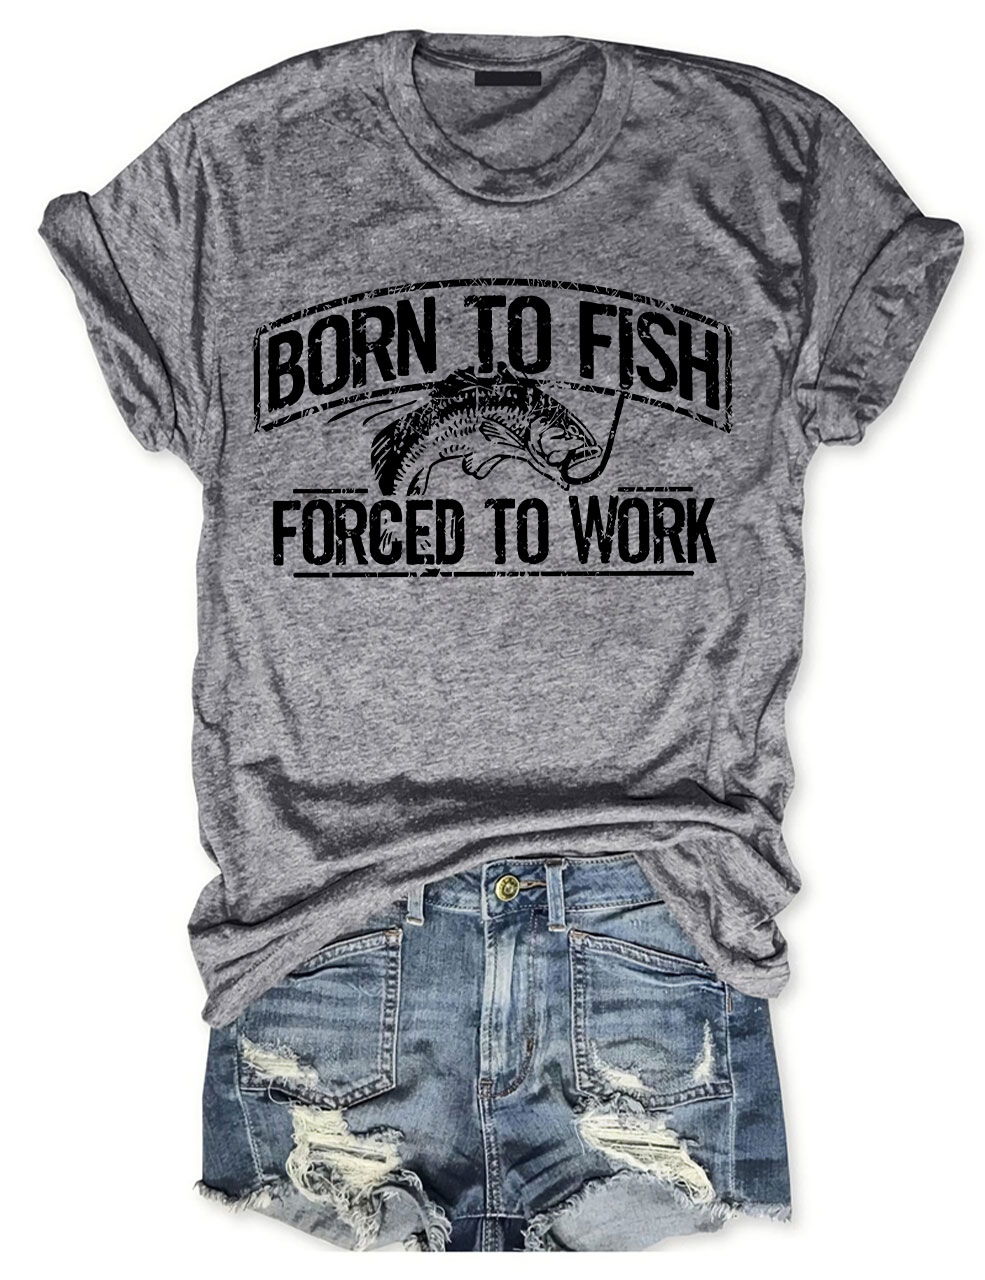 Born To Fish Forced To Work T-shirt